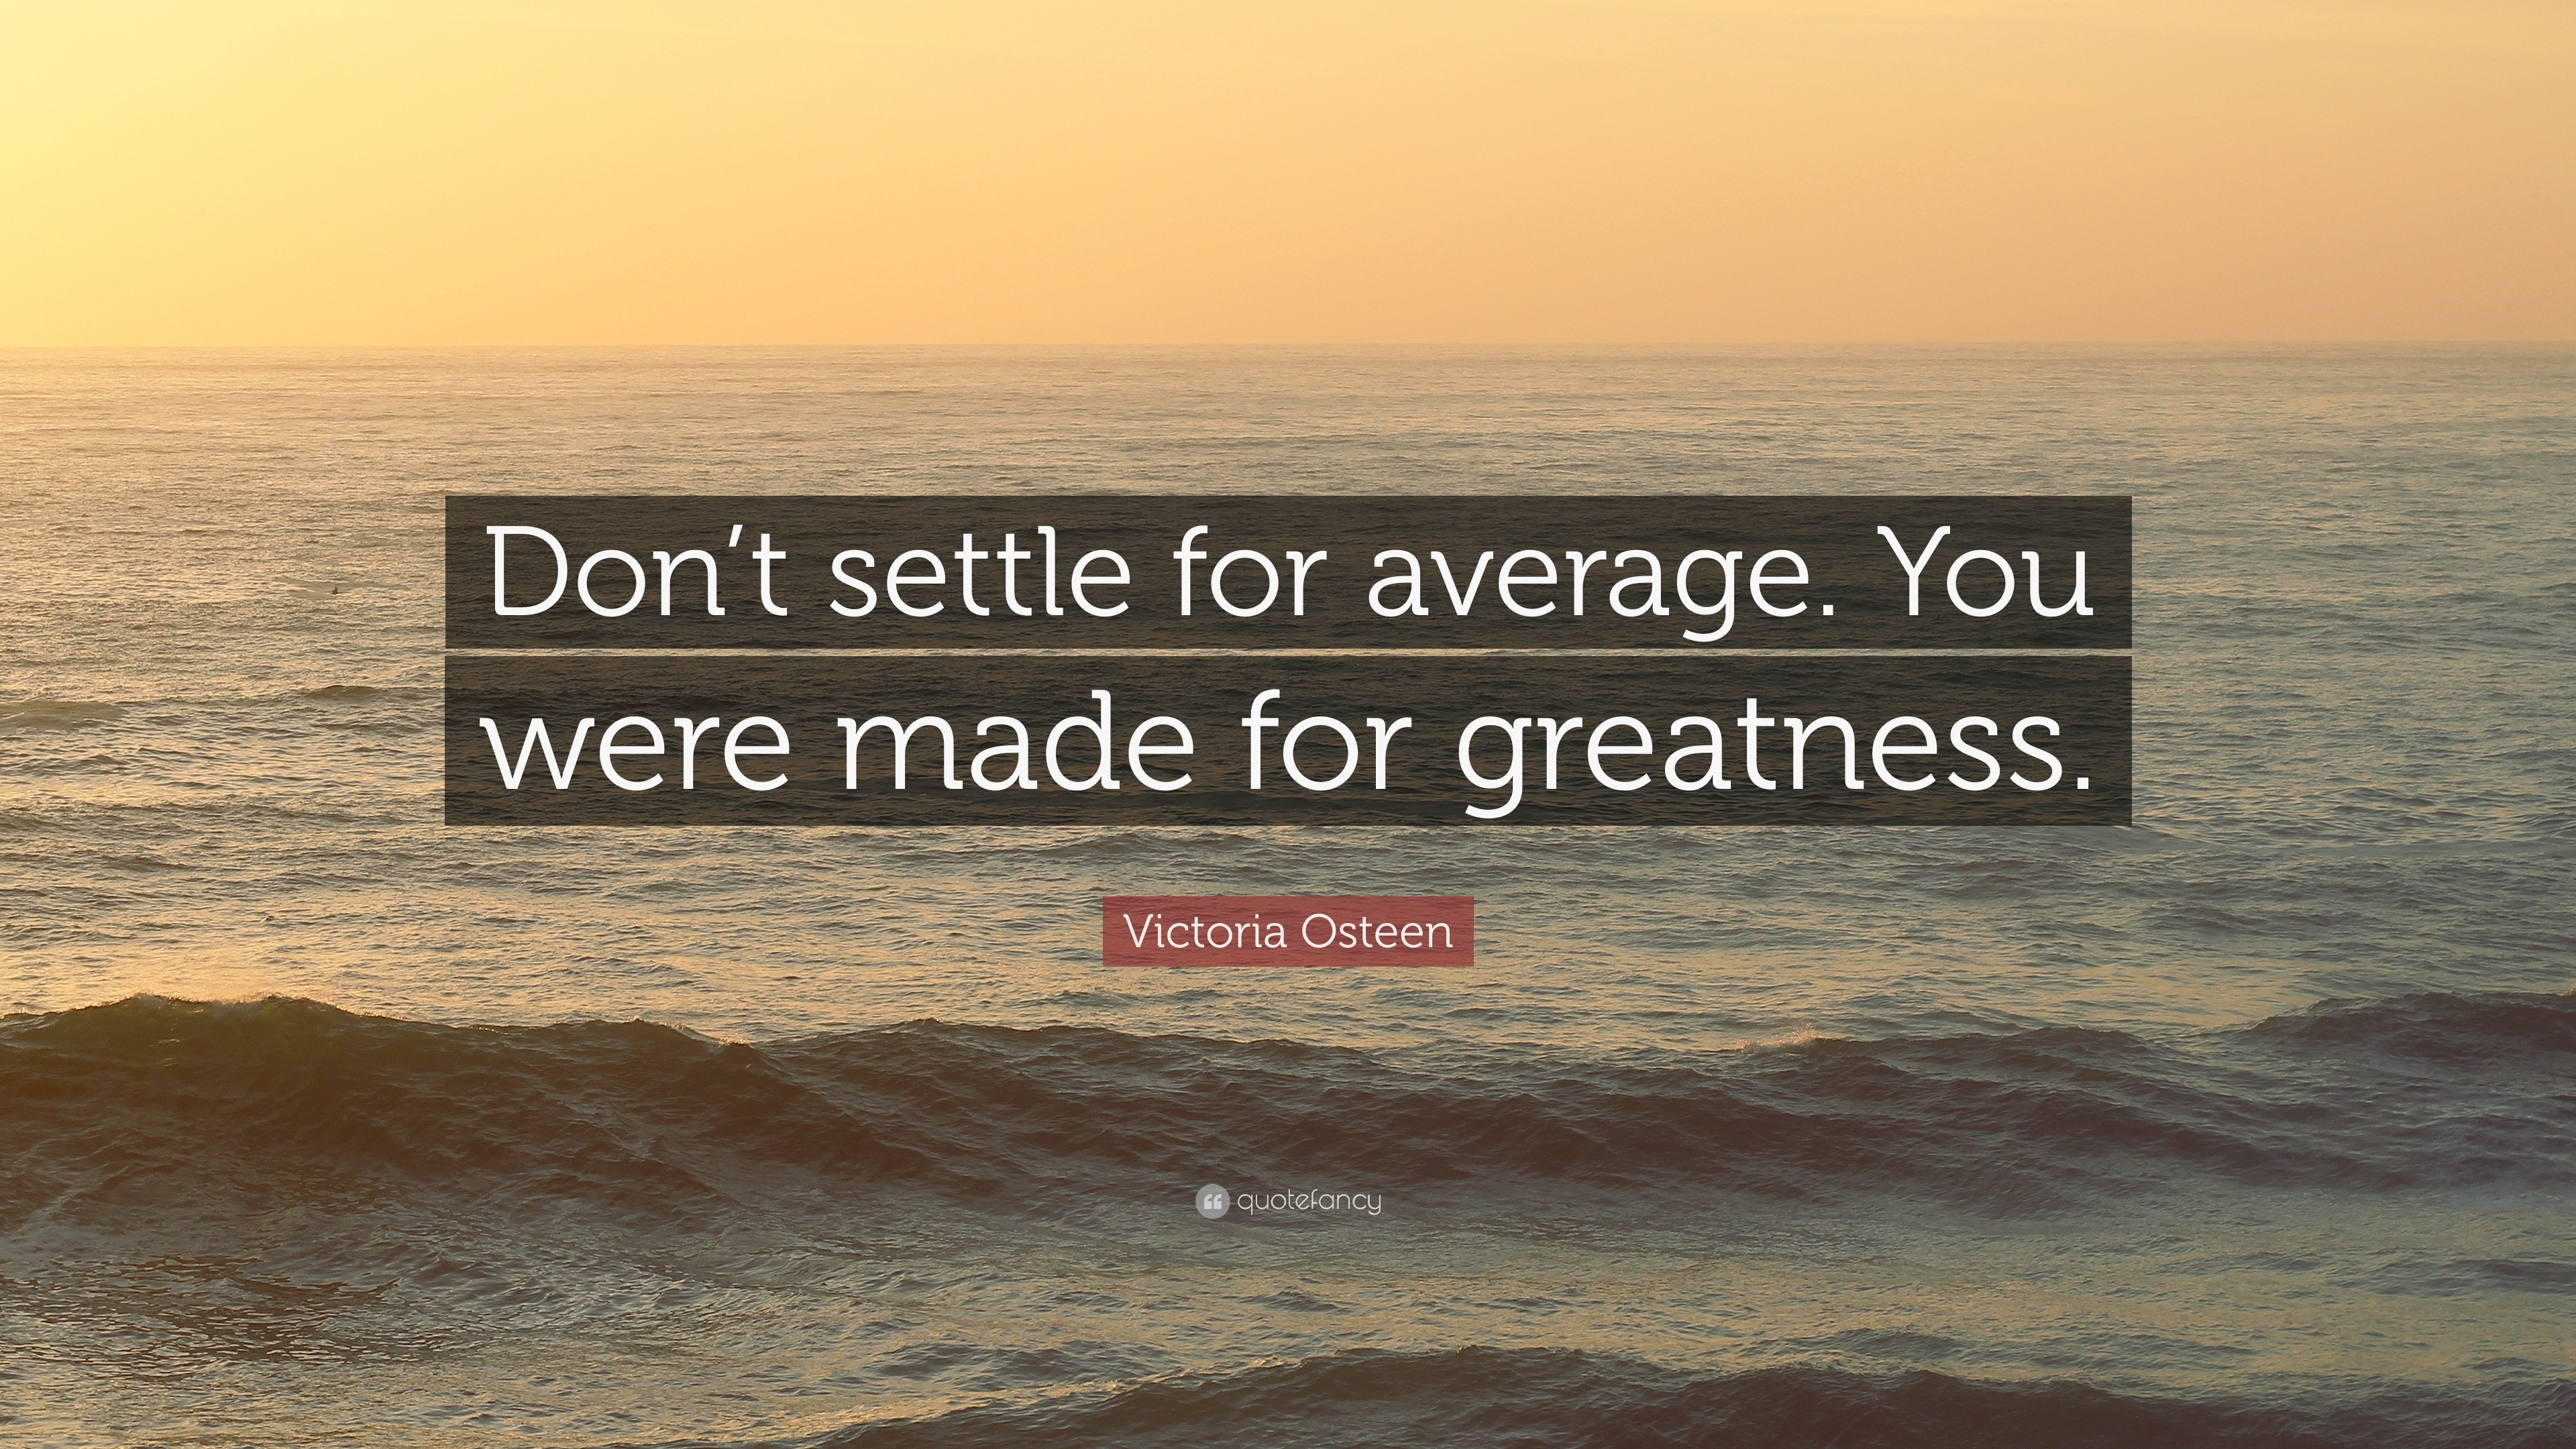 Victoria Osteen Quote “Don’t settle for average. You were made for